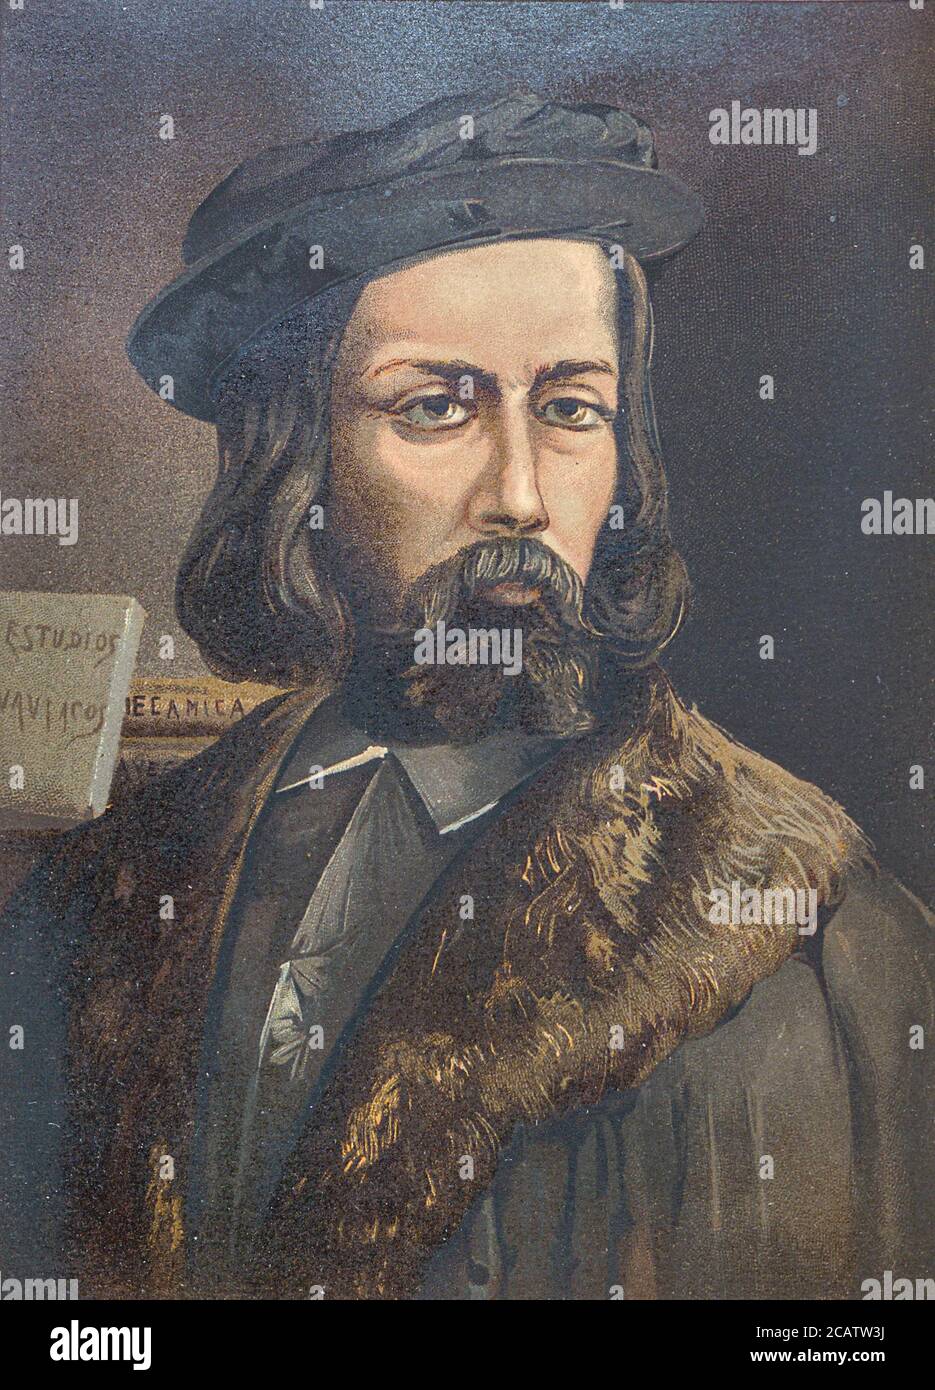 Blasco de Garay (1500–1552) was a Spanish navy captain and inventor. De Garay was a captain in the Spanish navy in the reign of the Holy Roman Emperor, Charles V. He made several important inventions, including diving apparatus, and introduced the paddle wheel as a substitute for oars. In the nineteenth century, a Spanish archivist claimed to have discovered documents that showed that de Garay had tested a steam-powered ship in 1543. From the book La ciencia y sus hombres : vidas de los sabios ilustres desde la antigüedad hasta el siglo XIX T. 3  [Science and its men: lives of the illustrious Stock Photo